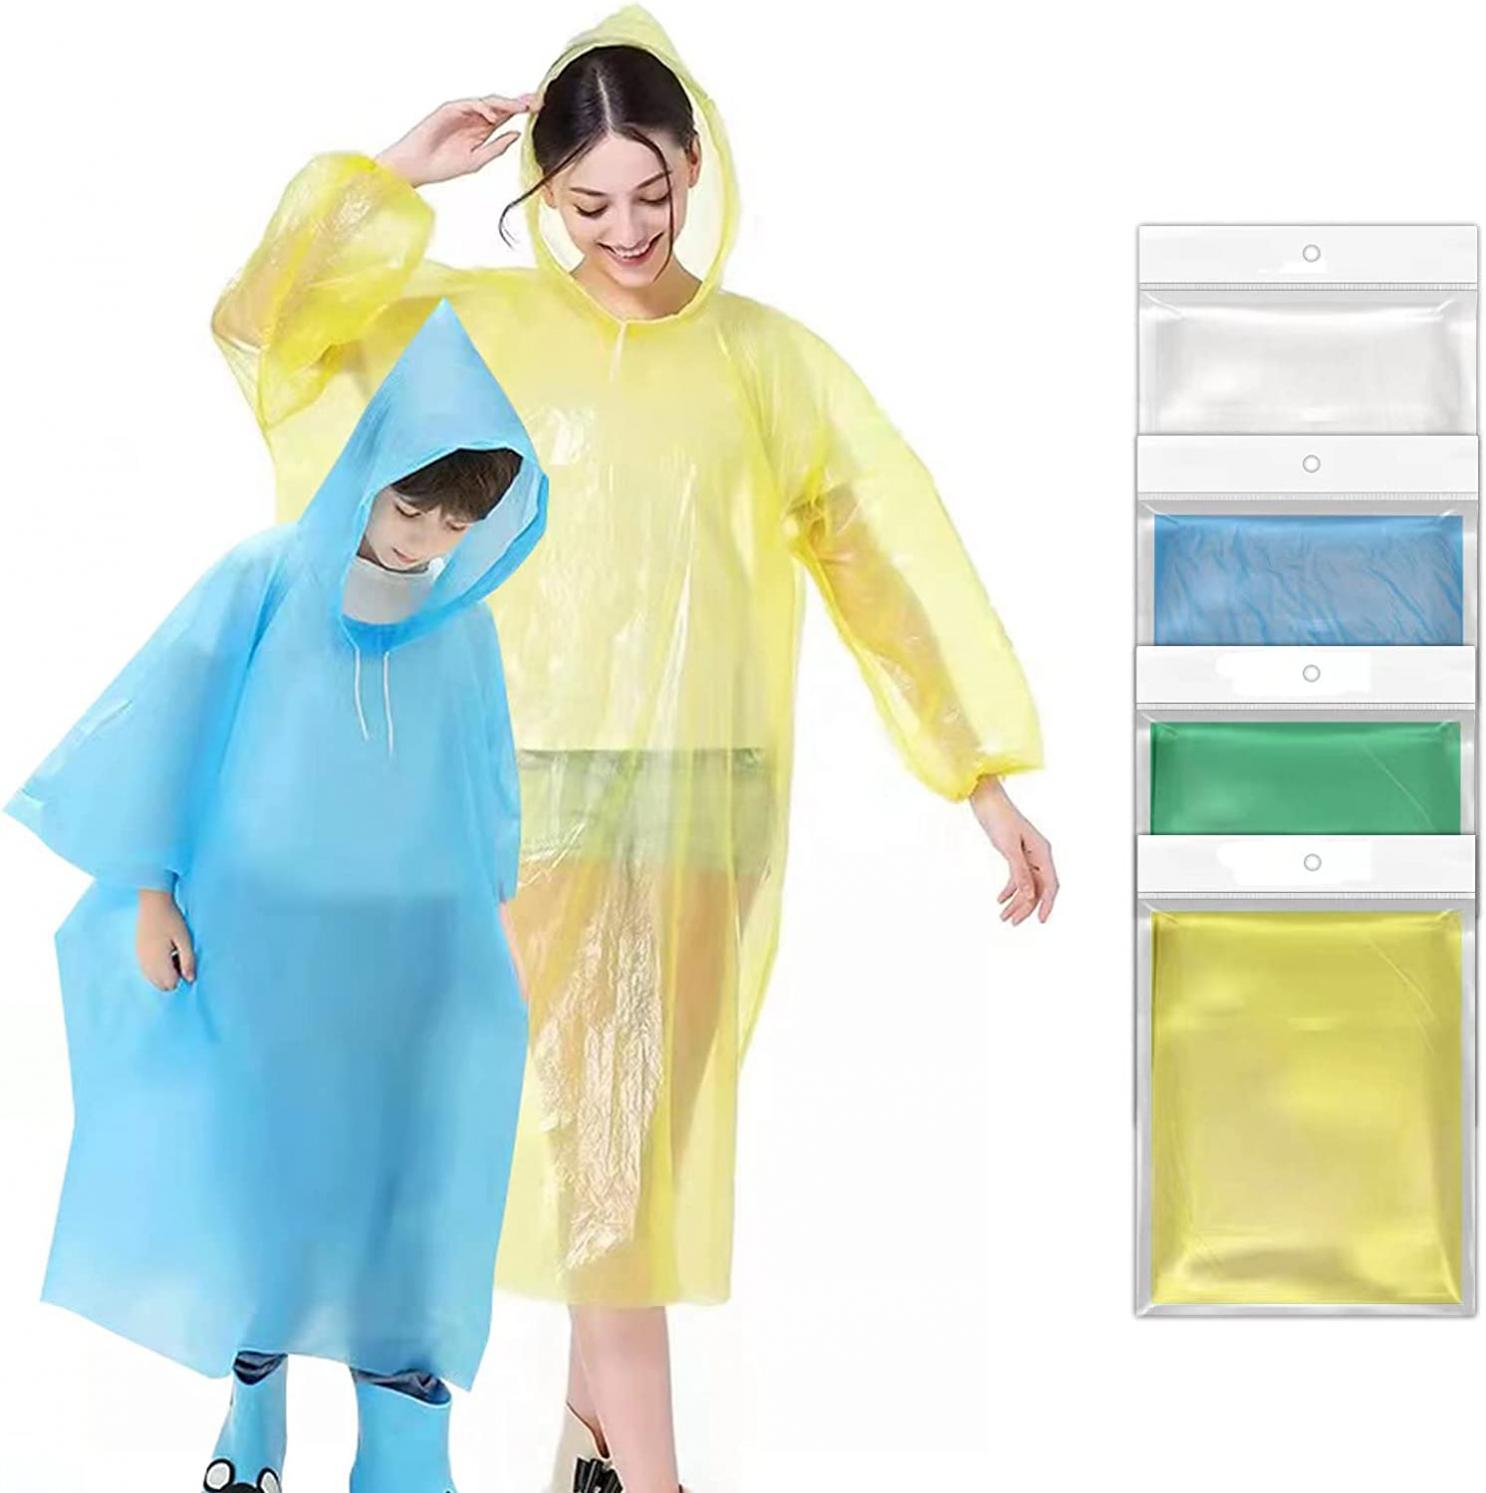 Ponchos Family Pack, Rain Poncho for Adults and Kids (5 Pack, 4 Colors) Disposable or Reusable Emergency Ponchos丨Rain Ponchos with Drawstring Hood